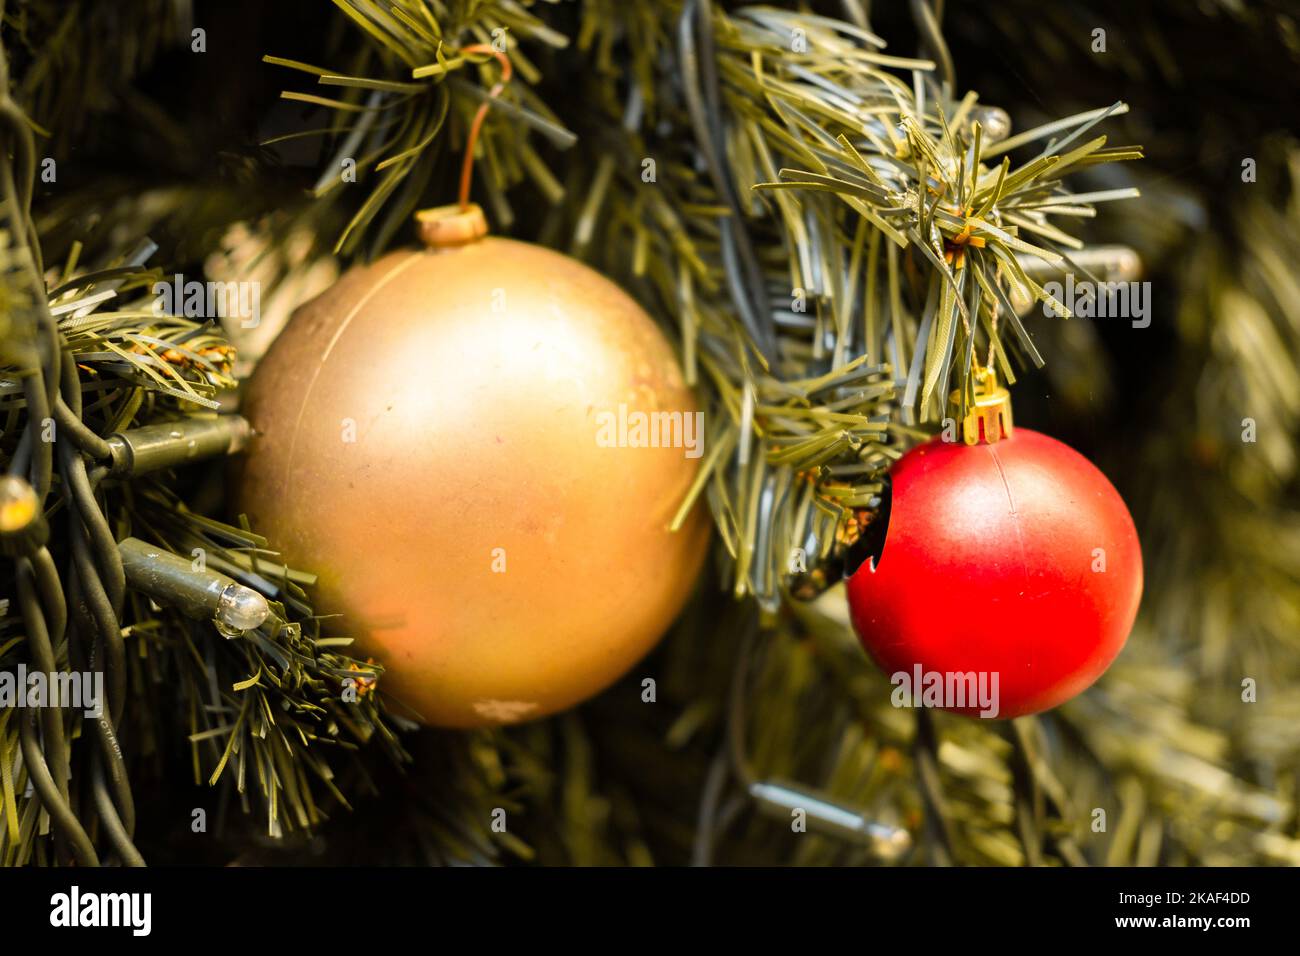 Close-up horizontal photo of a decorated Christmas tree with Christmas balls Stock Photo